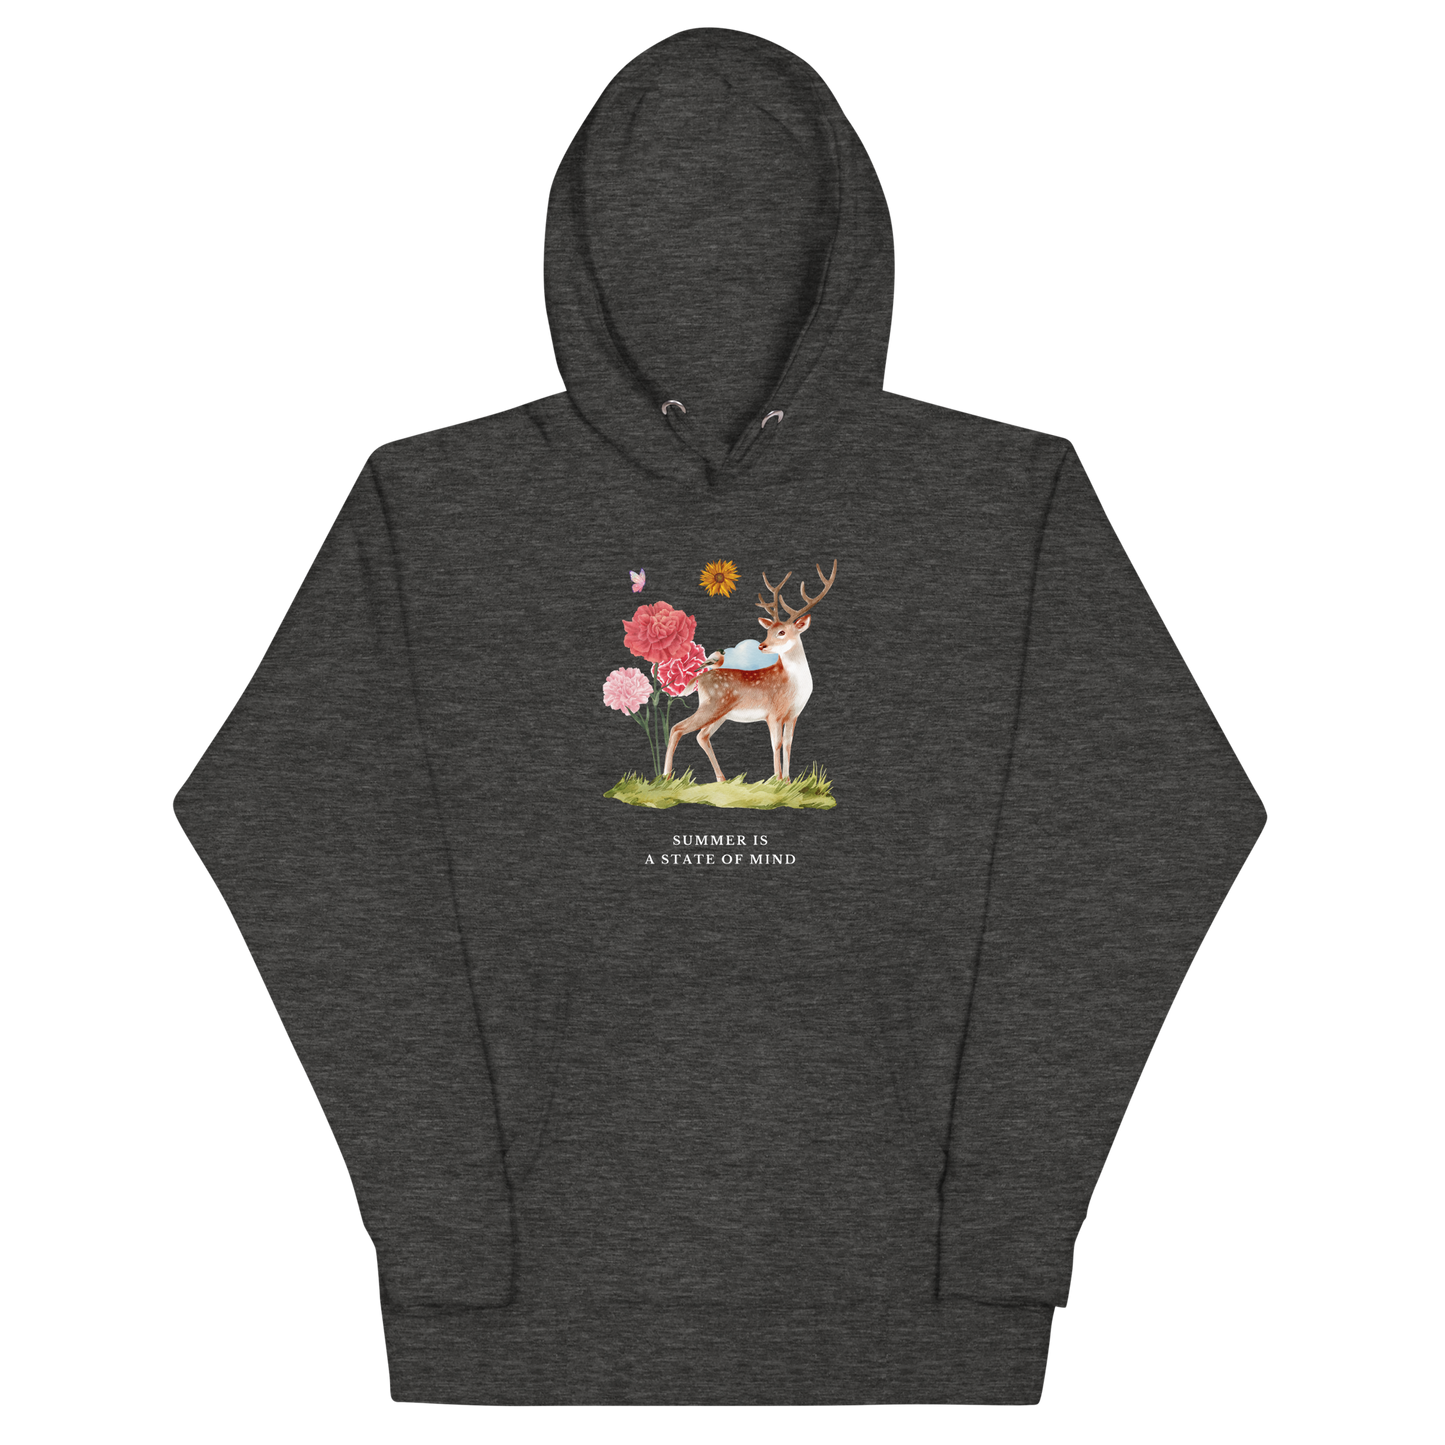 Charcoal Heather Premium Summer Is a State of Mind Hoodie showcasing a Summer Is a State of Mind graphic on the chest - Cute Graphic Summer Hoodies - Boozy Fox